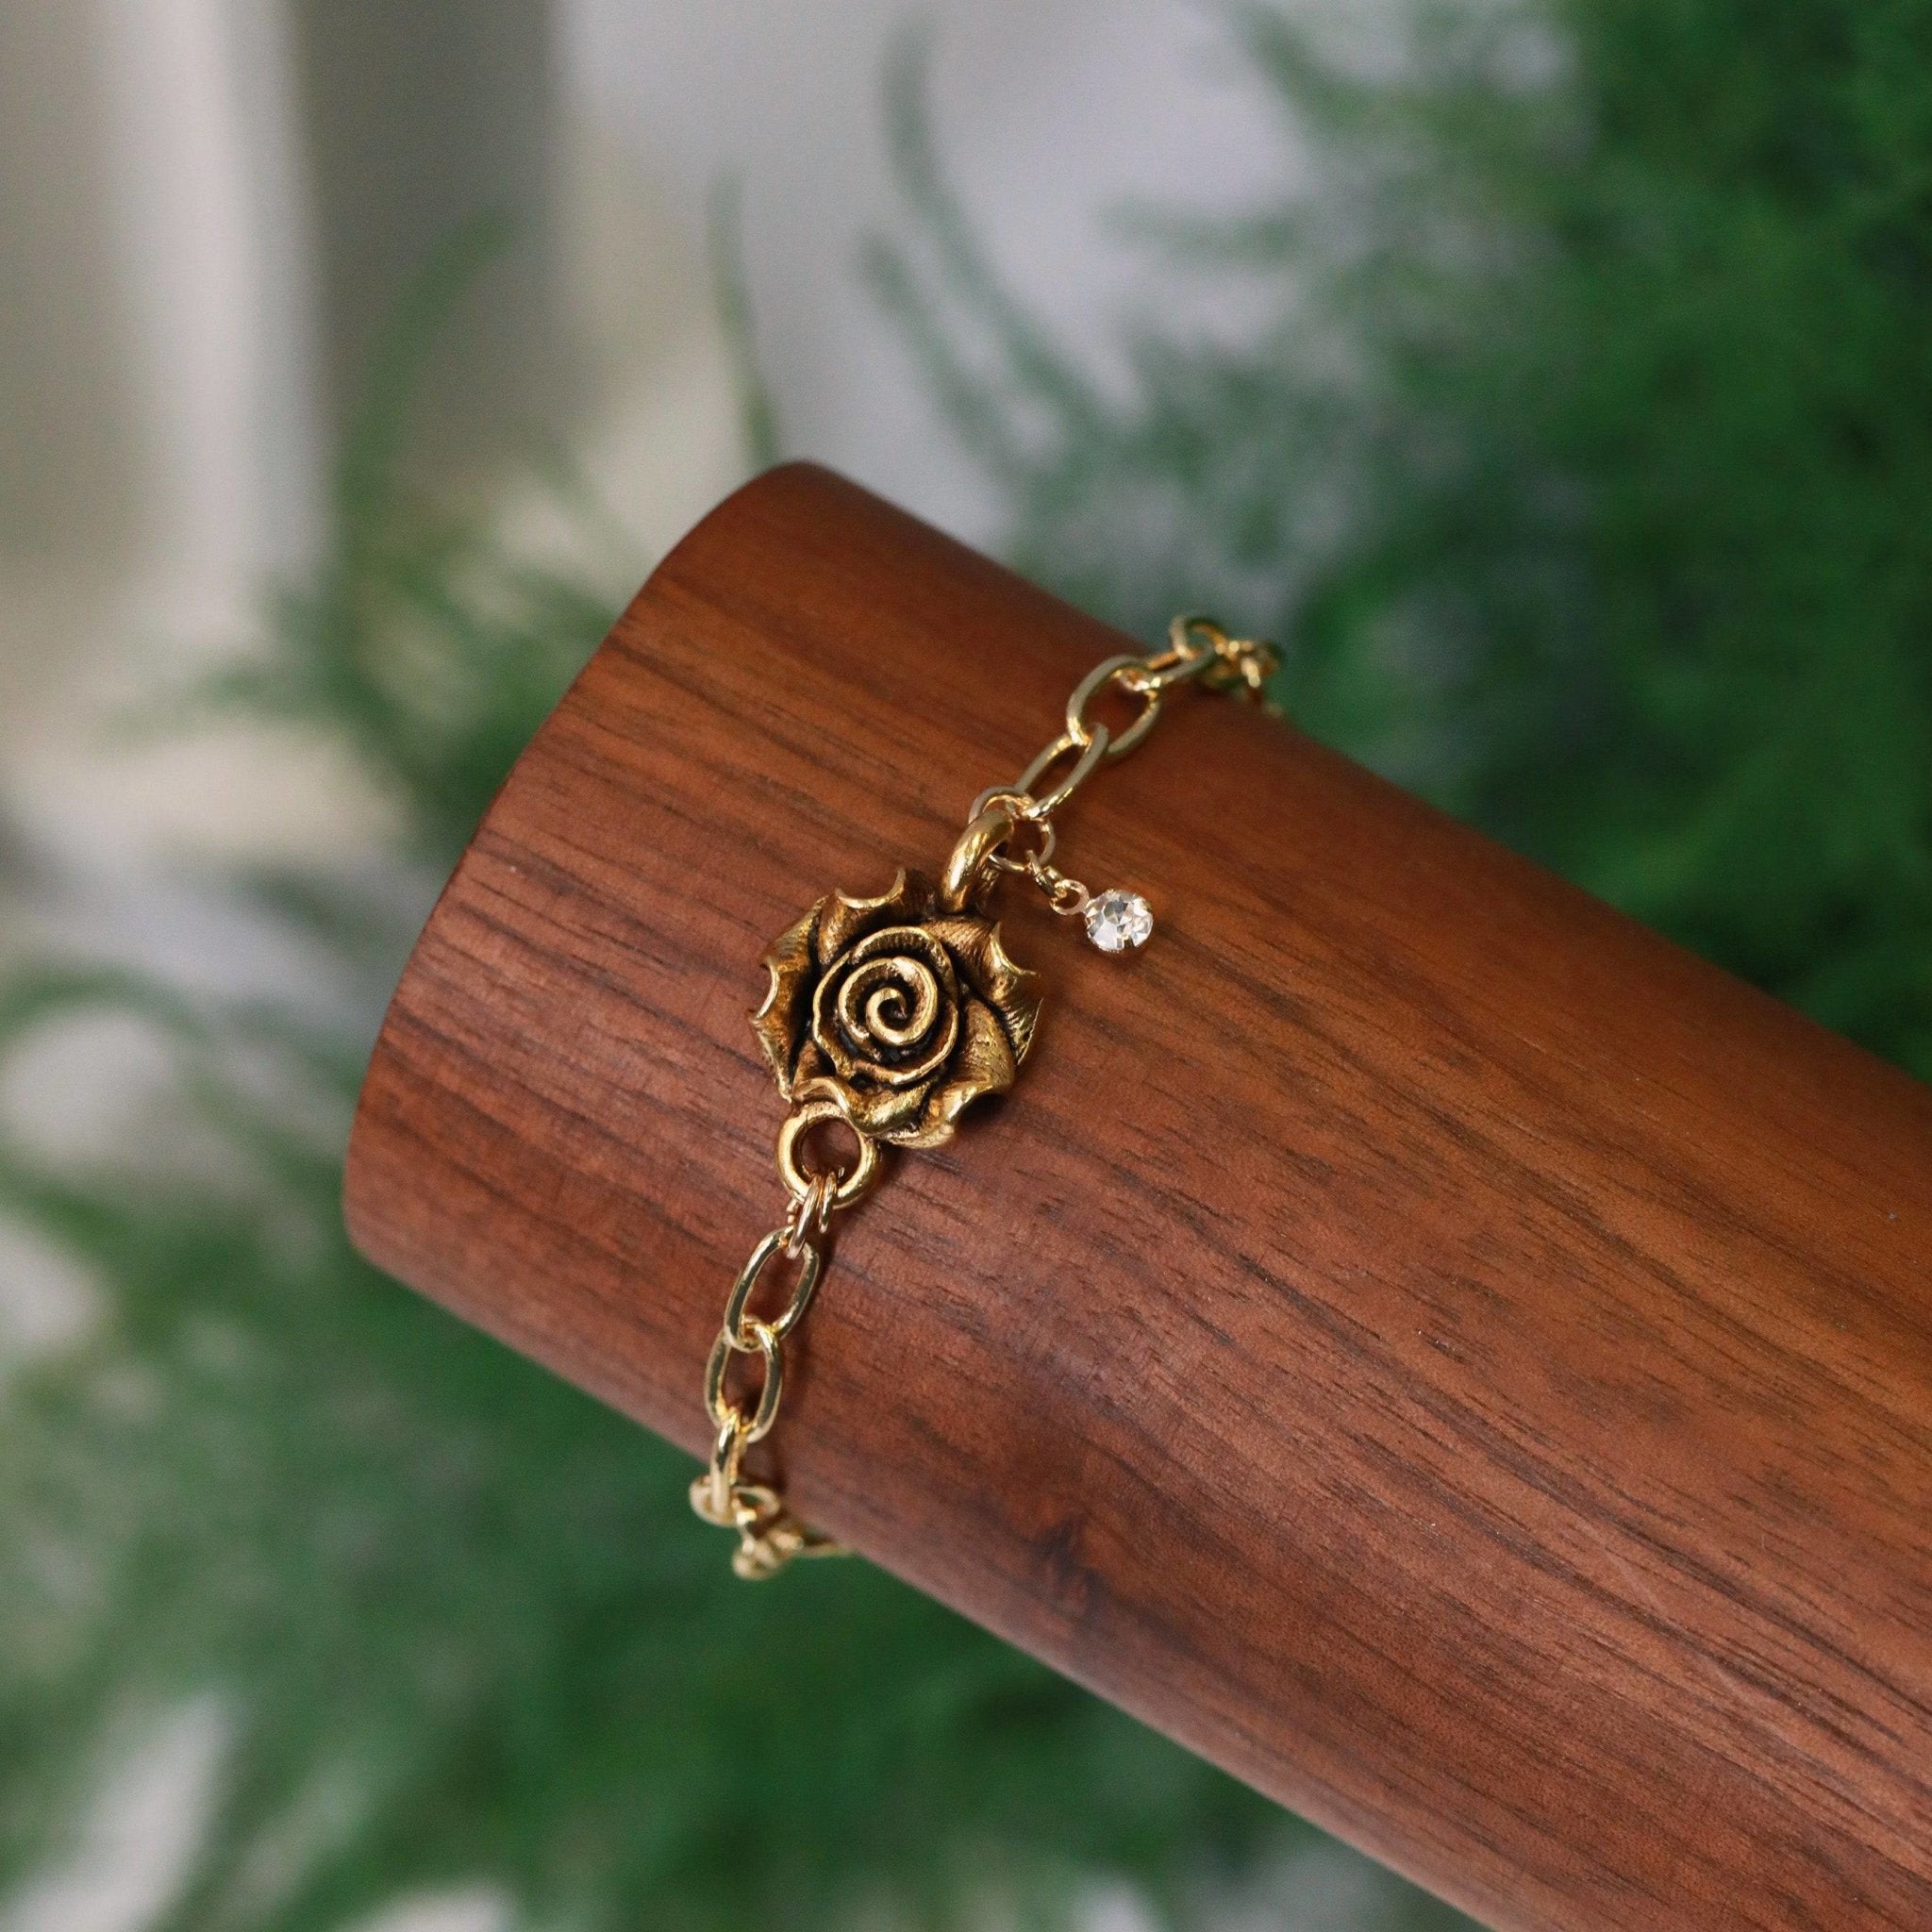 gold rose connector bracelet with crystal charm on gold plated chain closeup